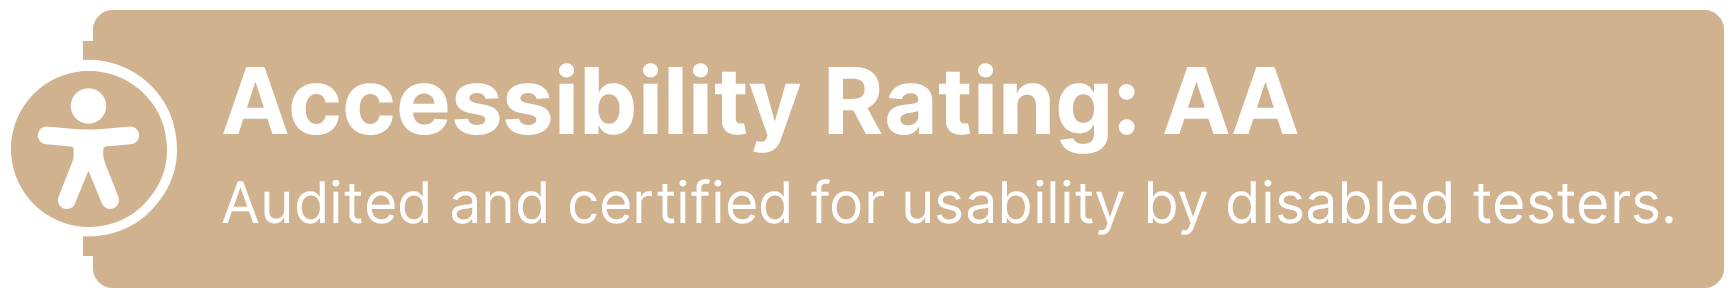 Accessibility Rating: AA, Audited and certified for
usability by disabled testers.